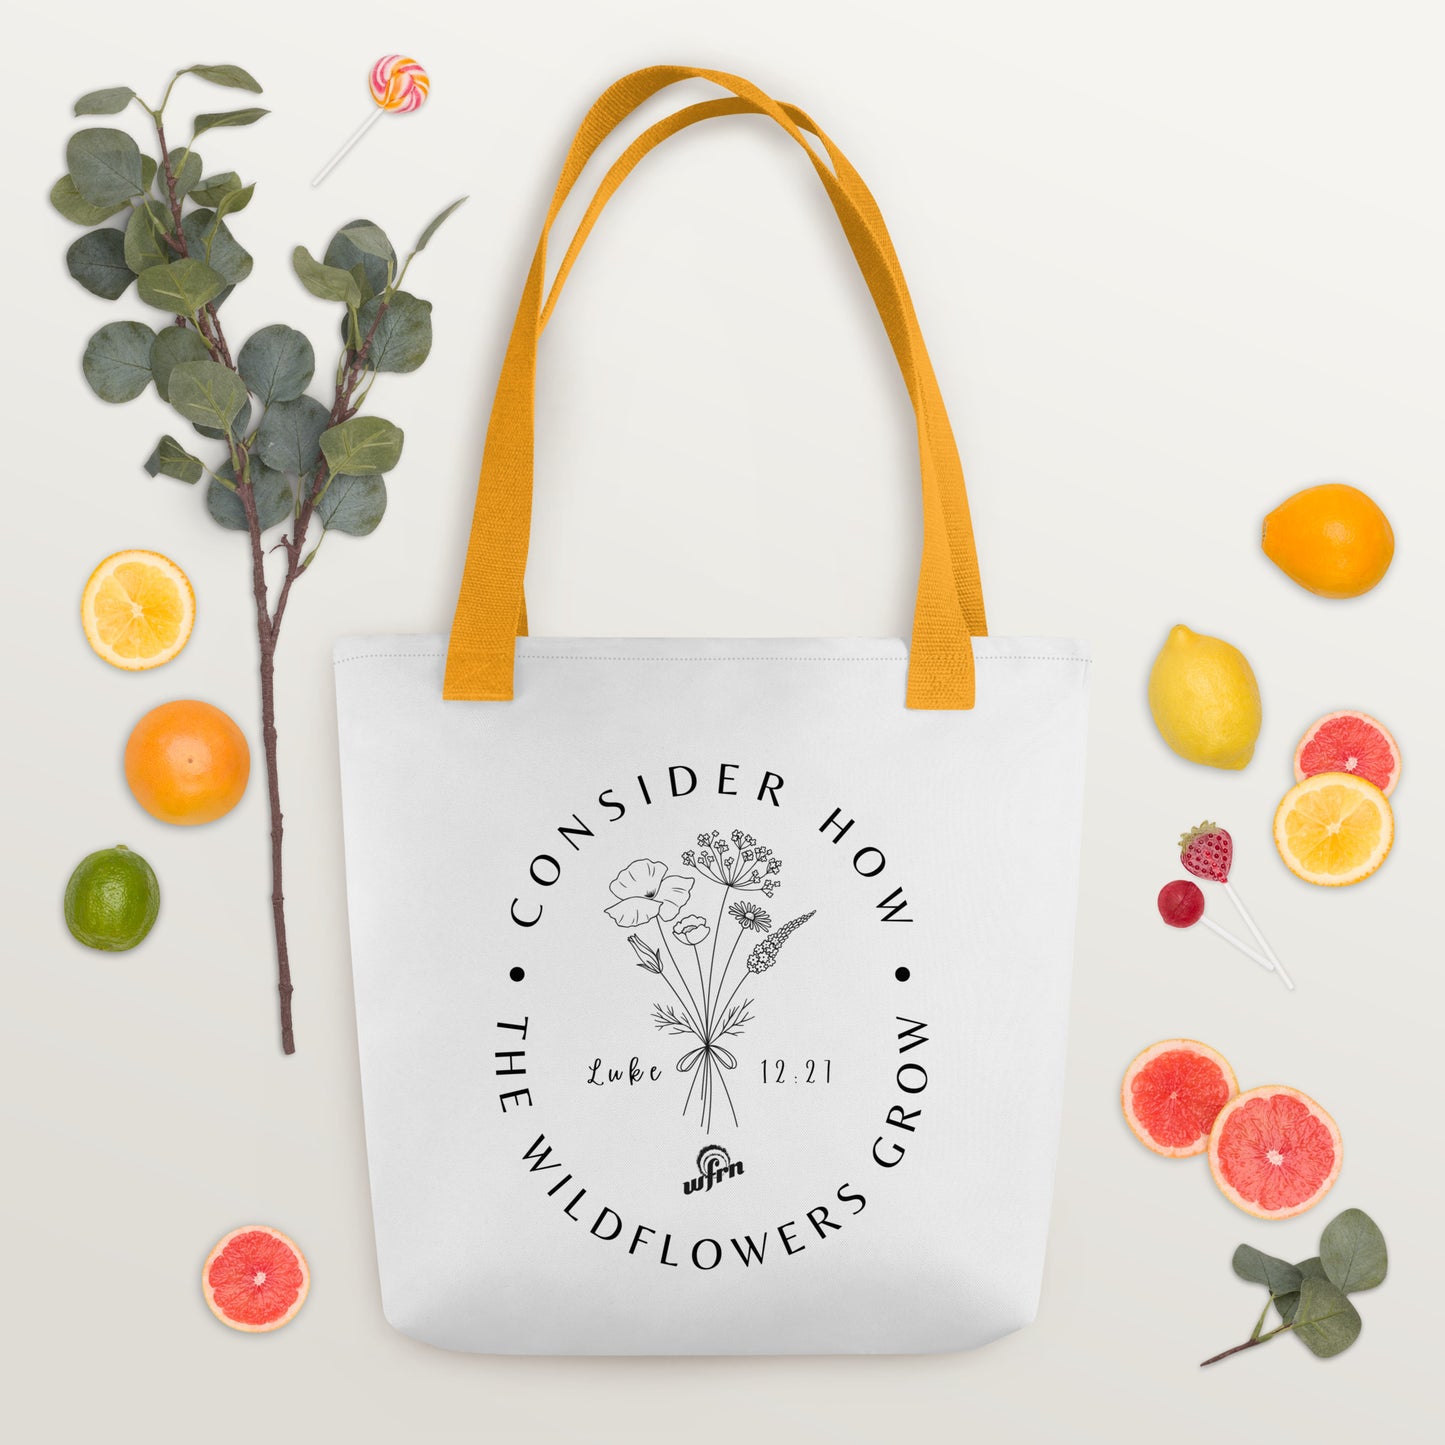 Consider the Wildflowers Tote bag